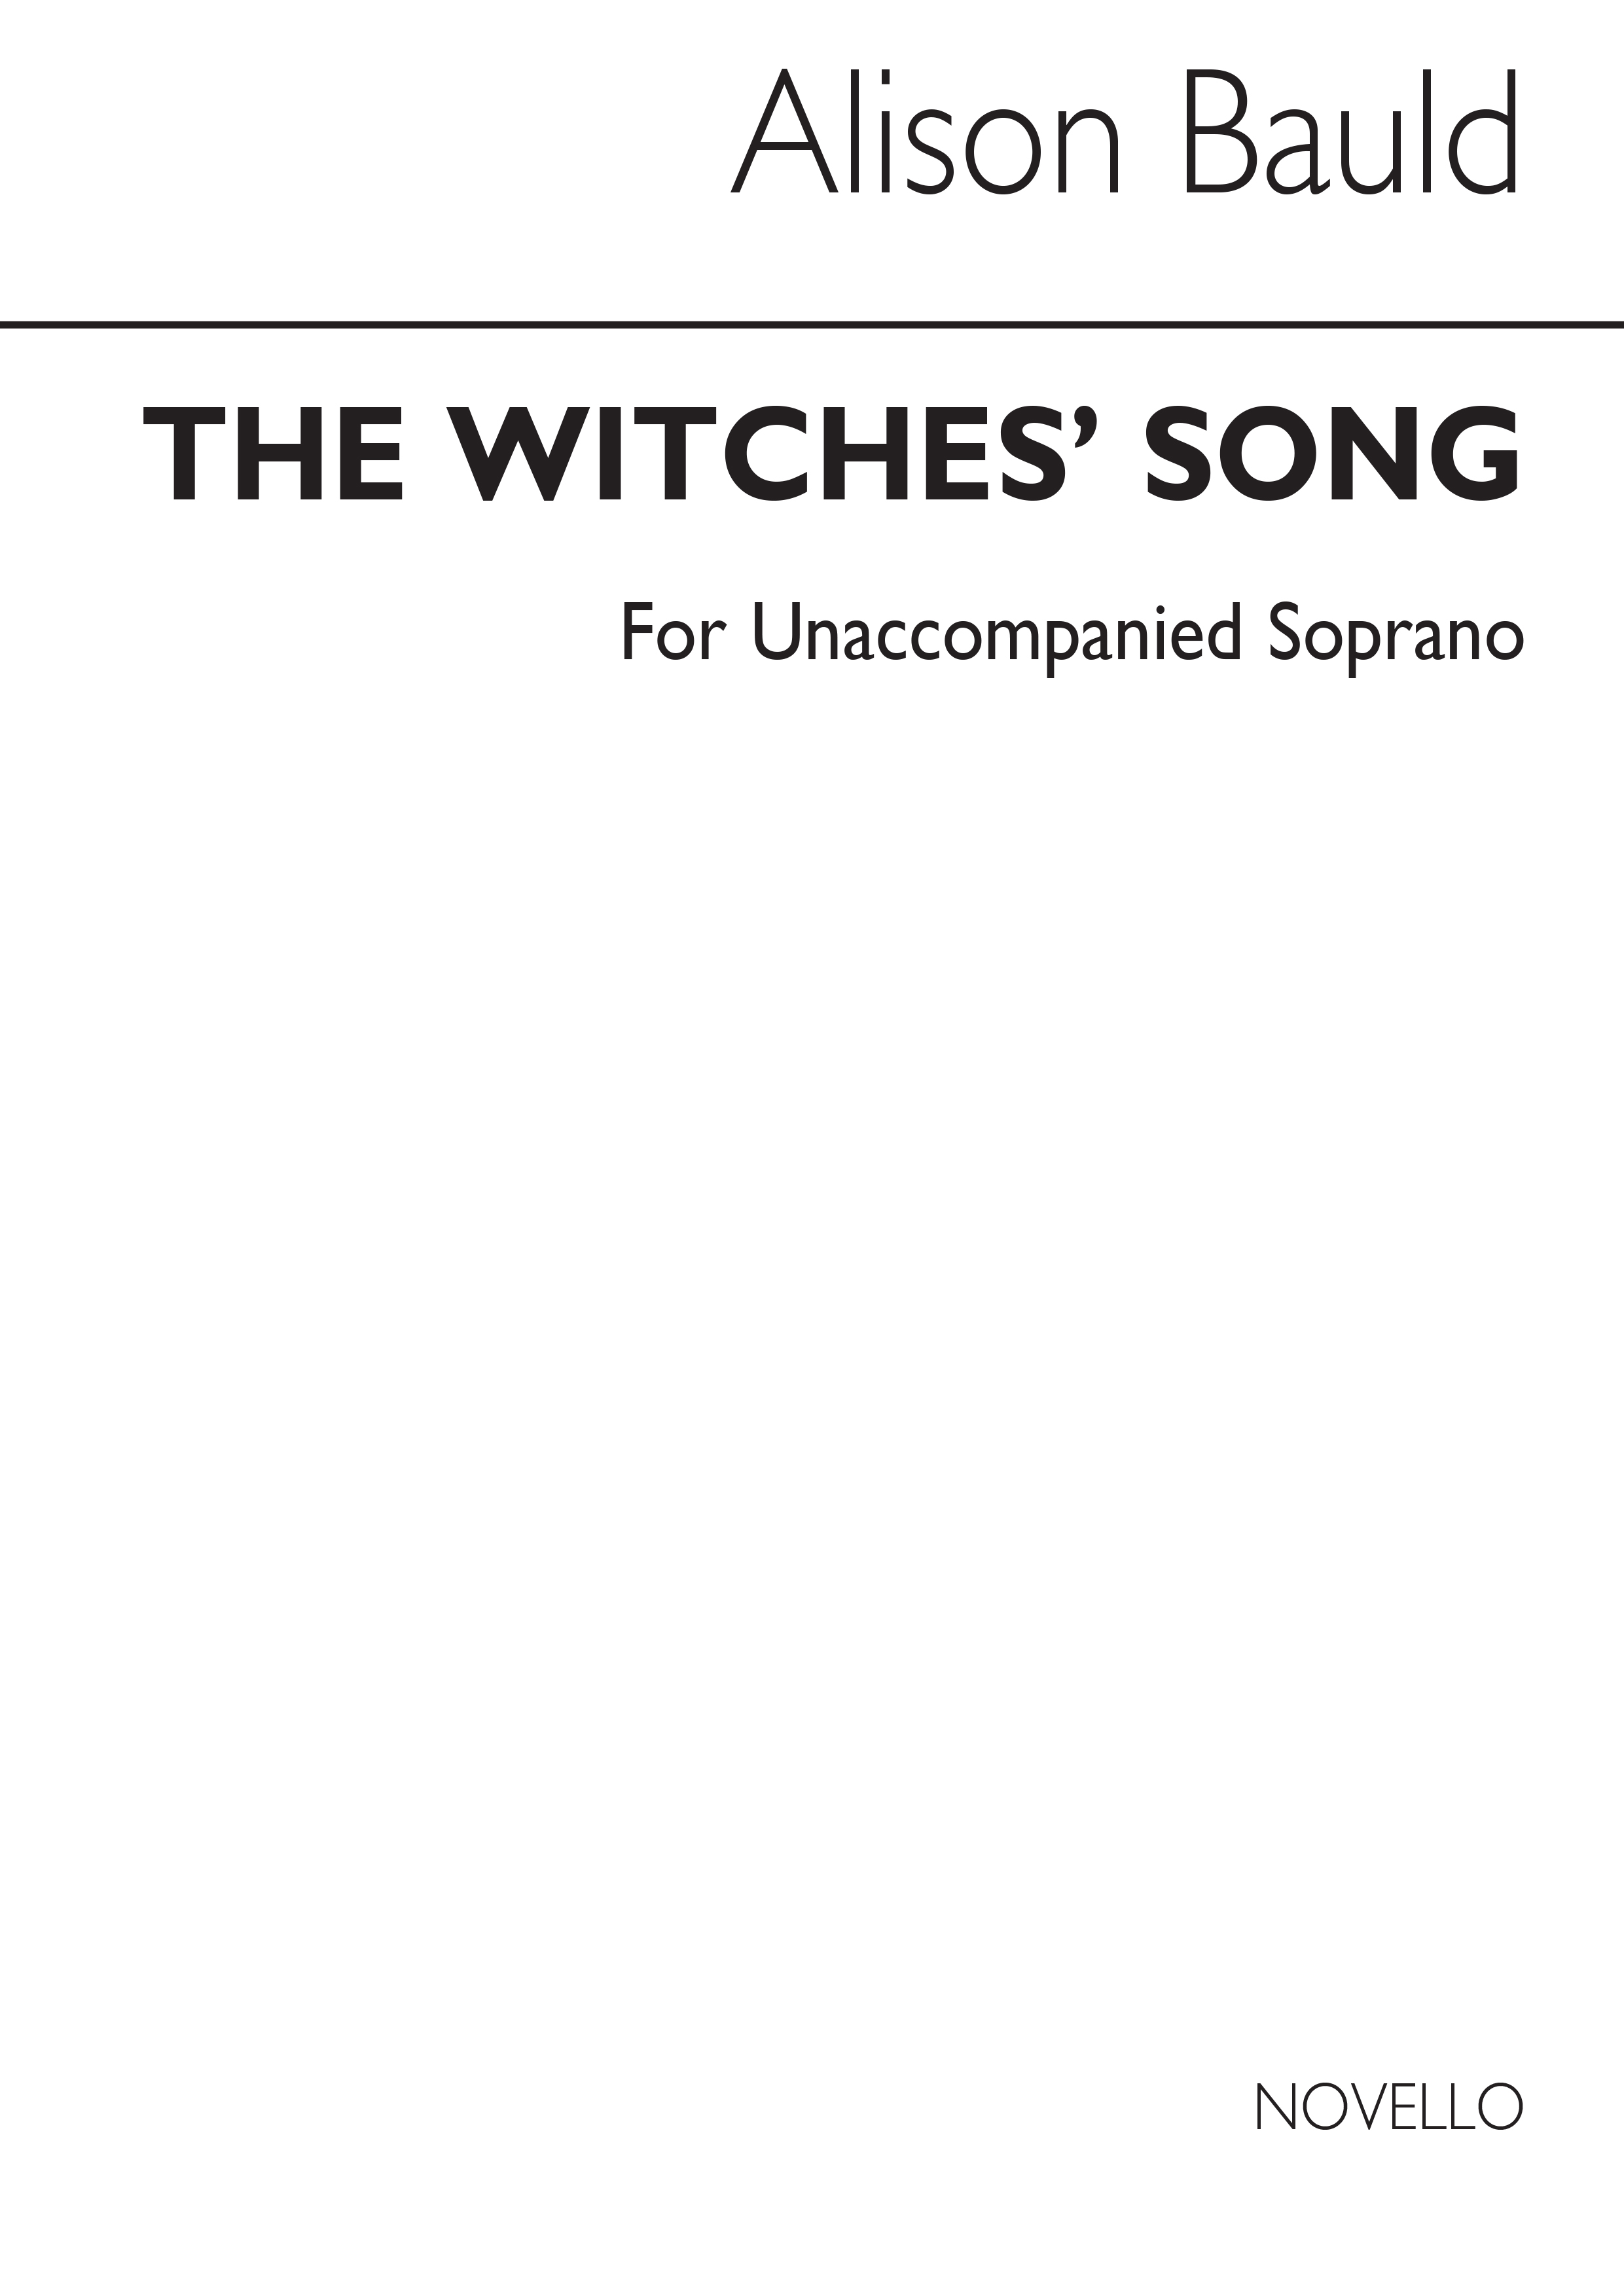 Bauld: The Witches' Song for Solo A Capella Soprano